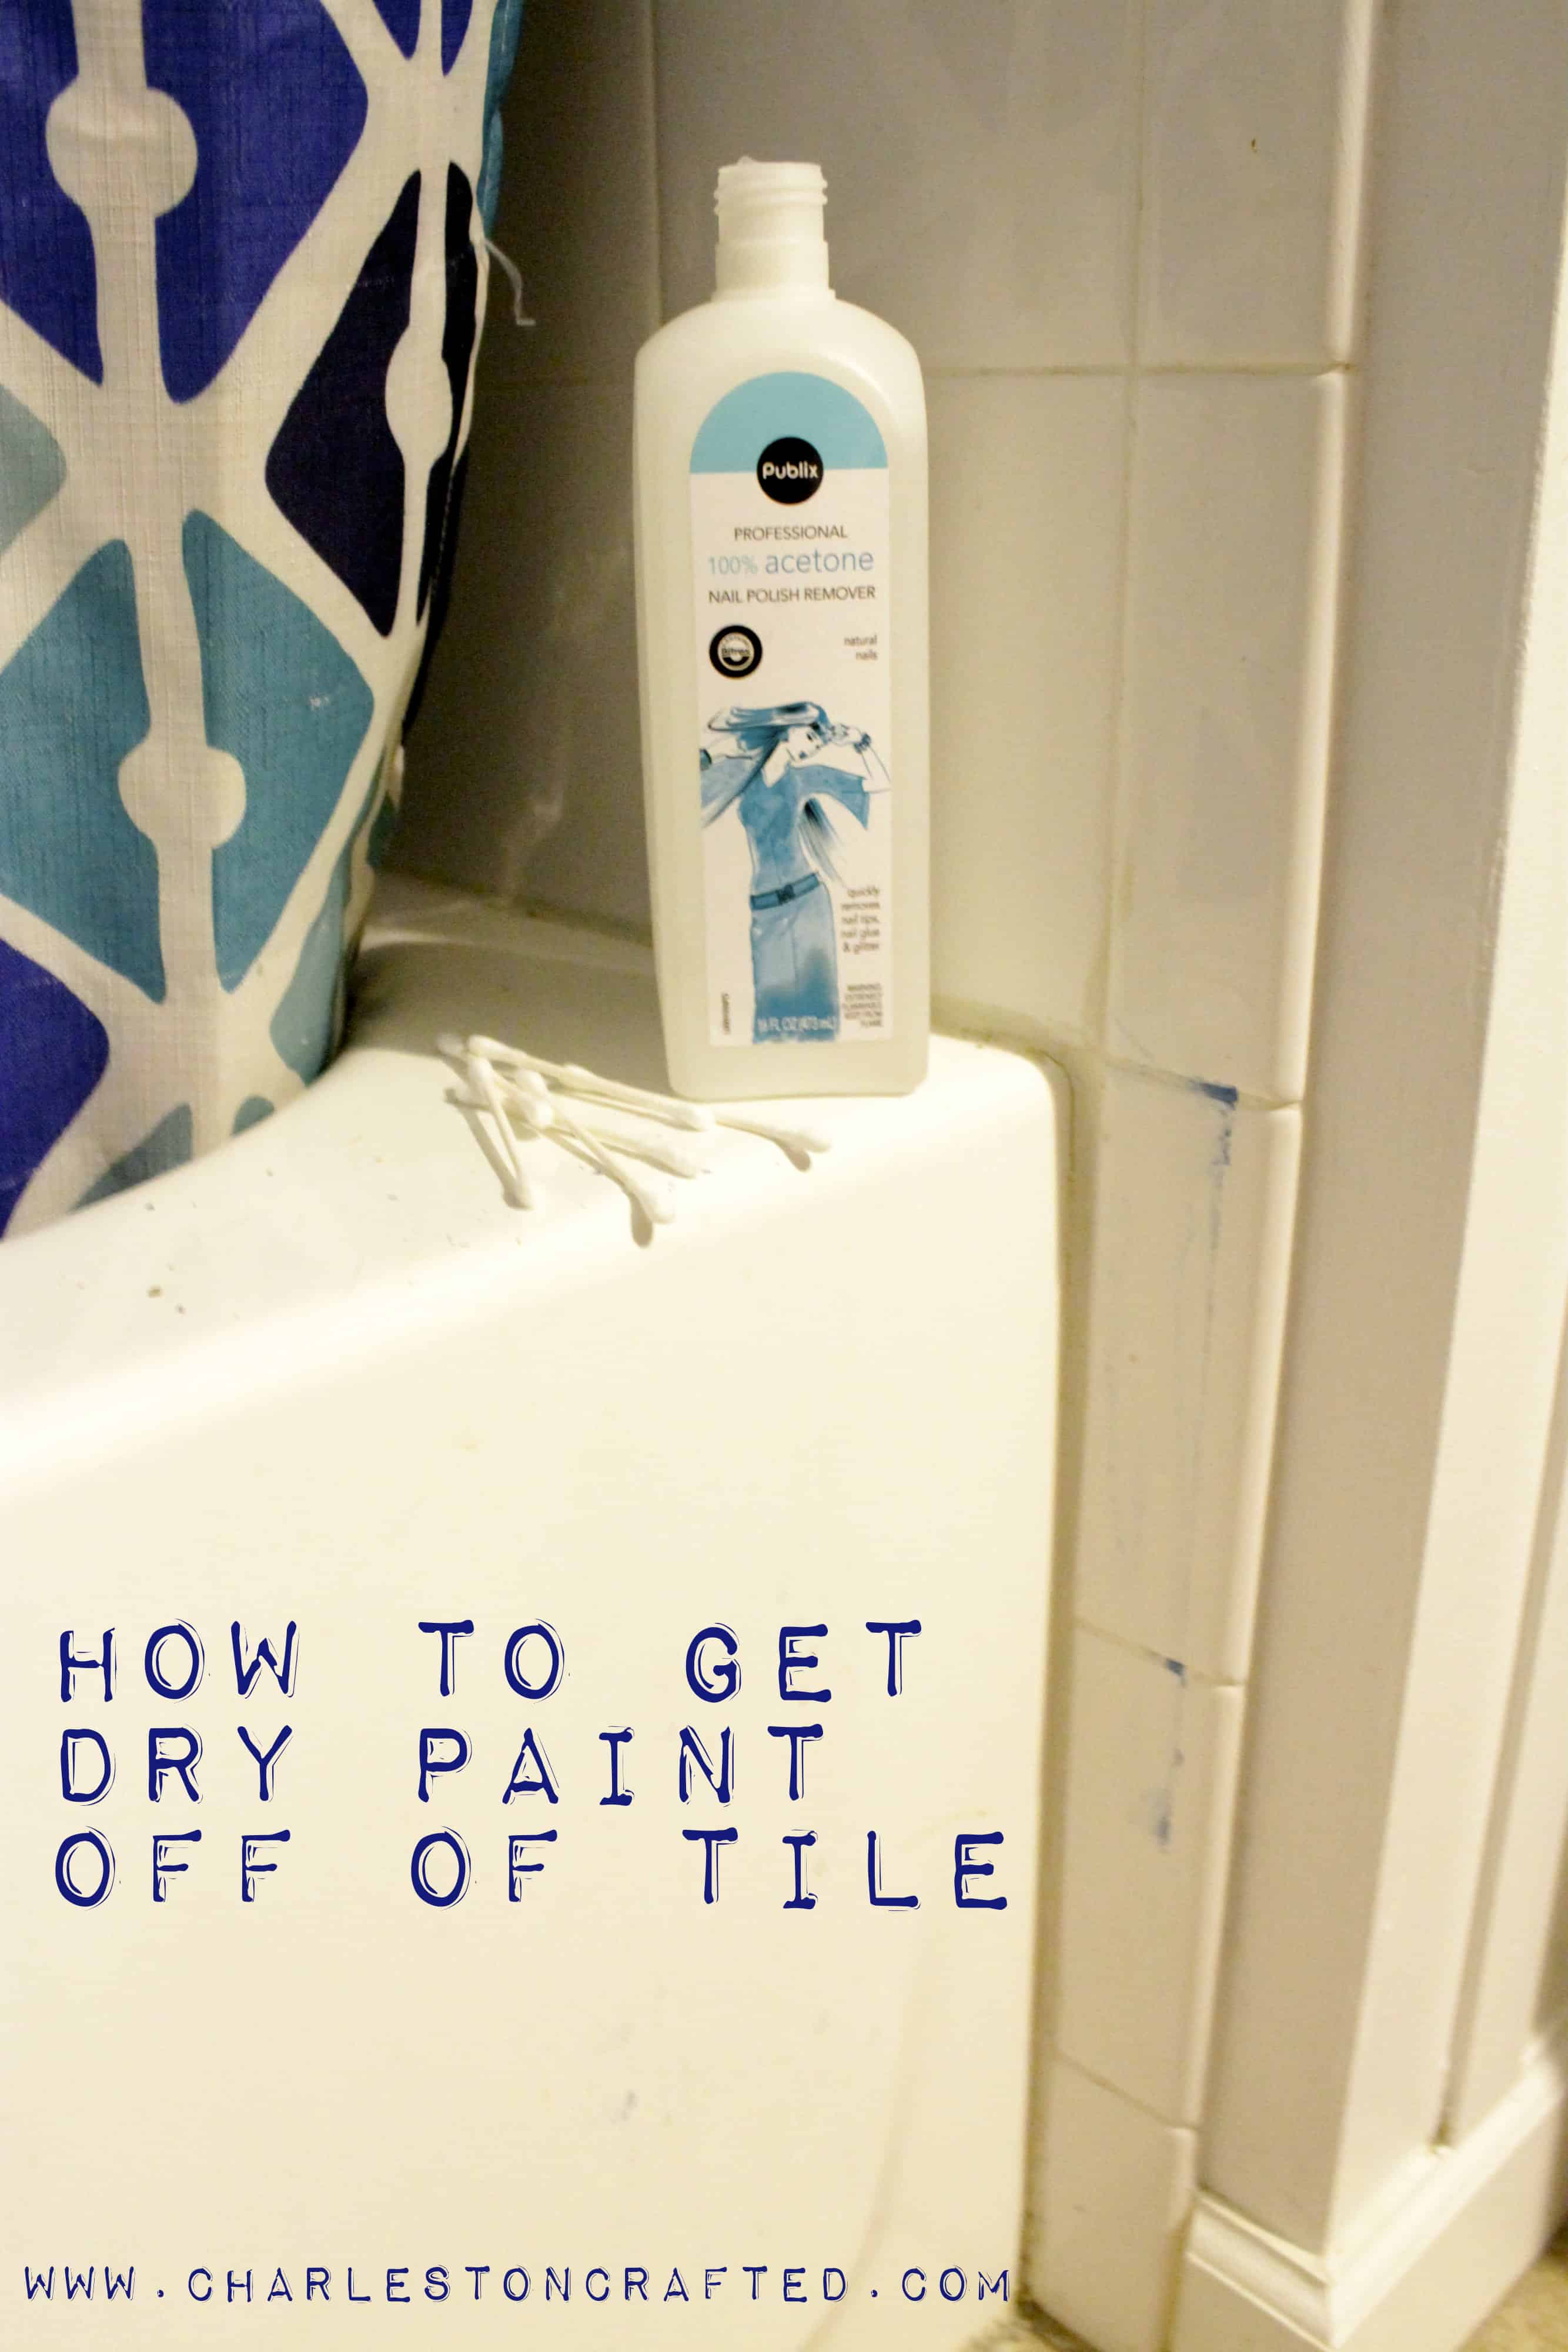 How to get dry paint off of tile - Charleston Crafted